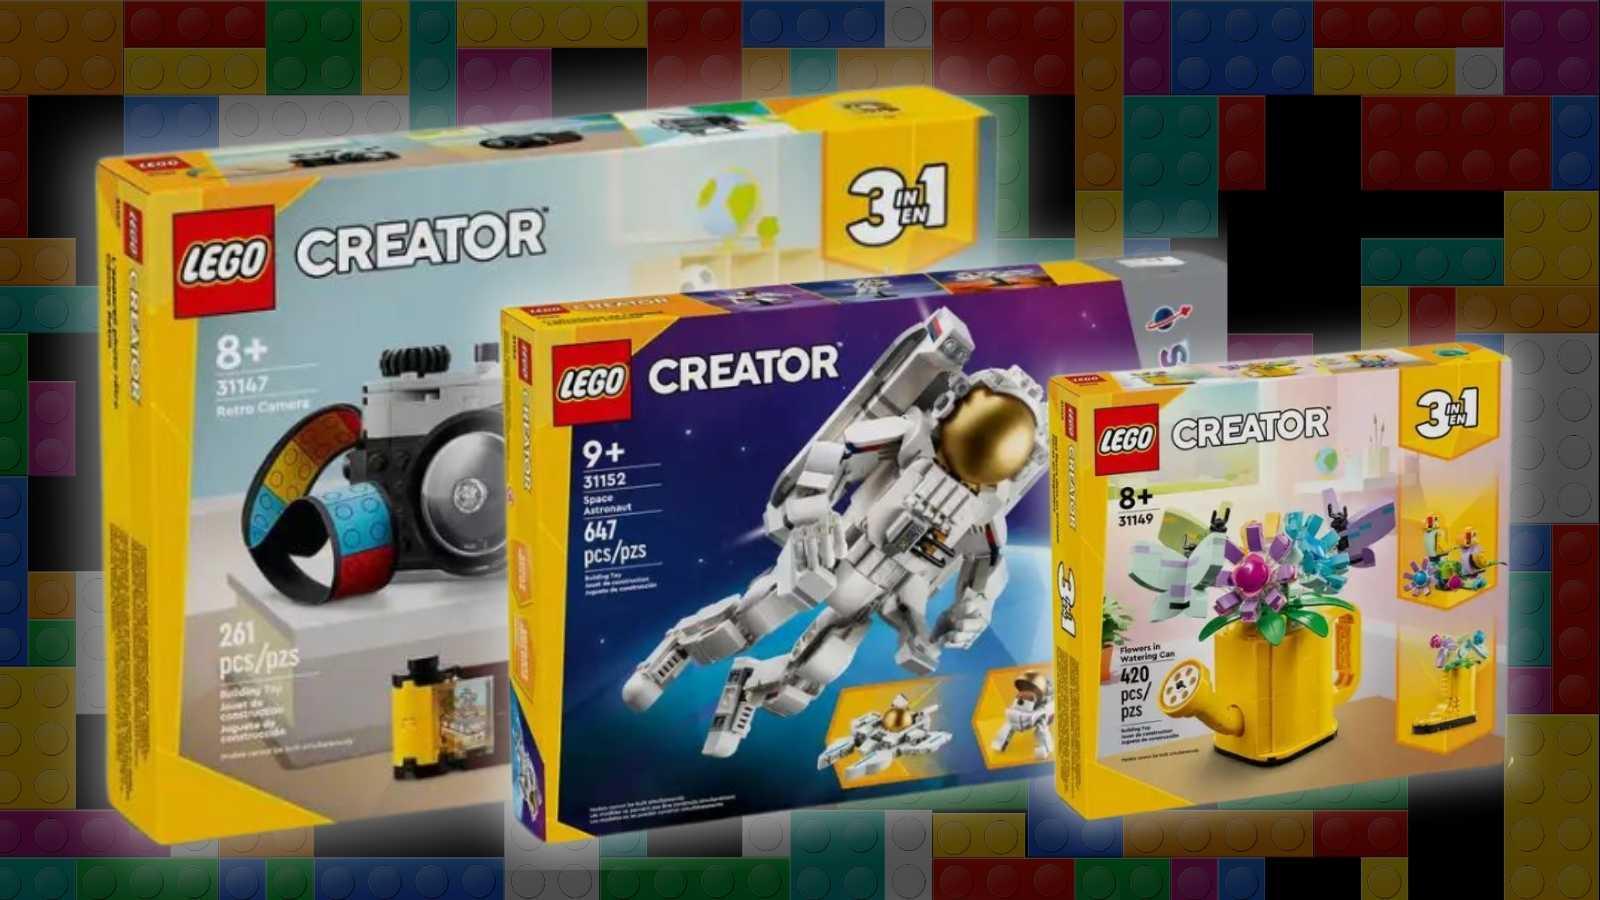 New LEGO Creator 3in1 sets on a LEGO background